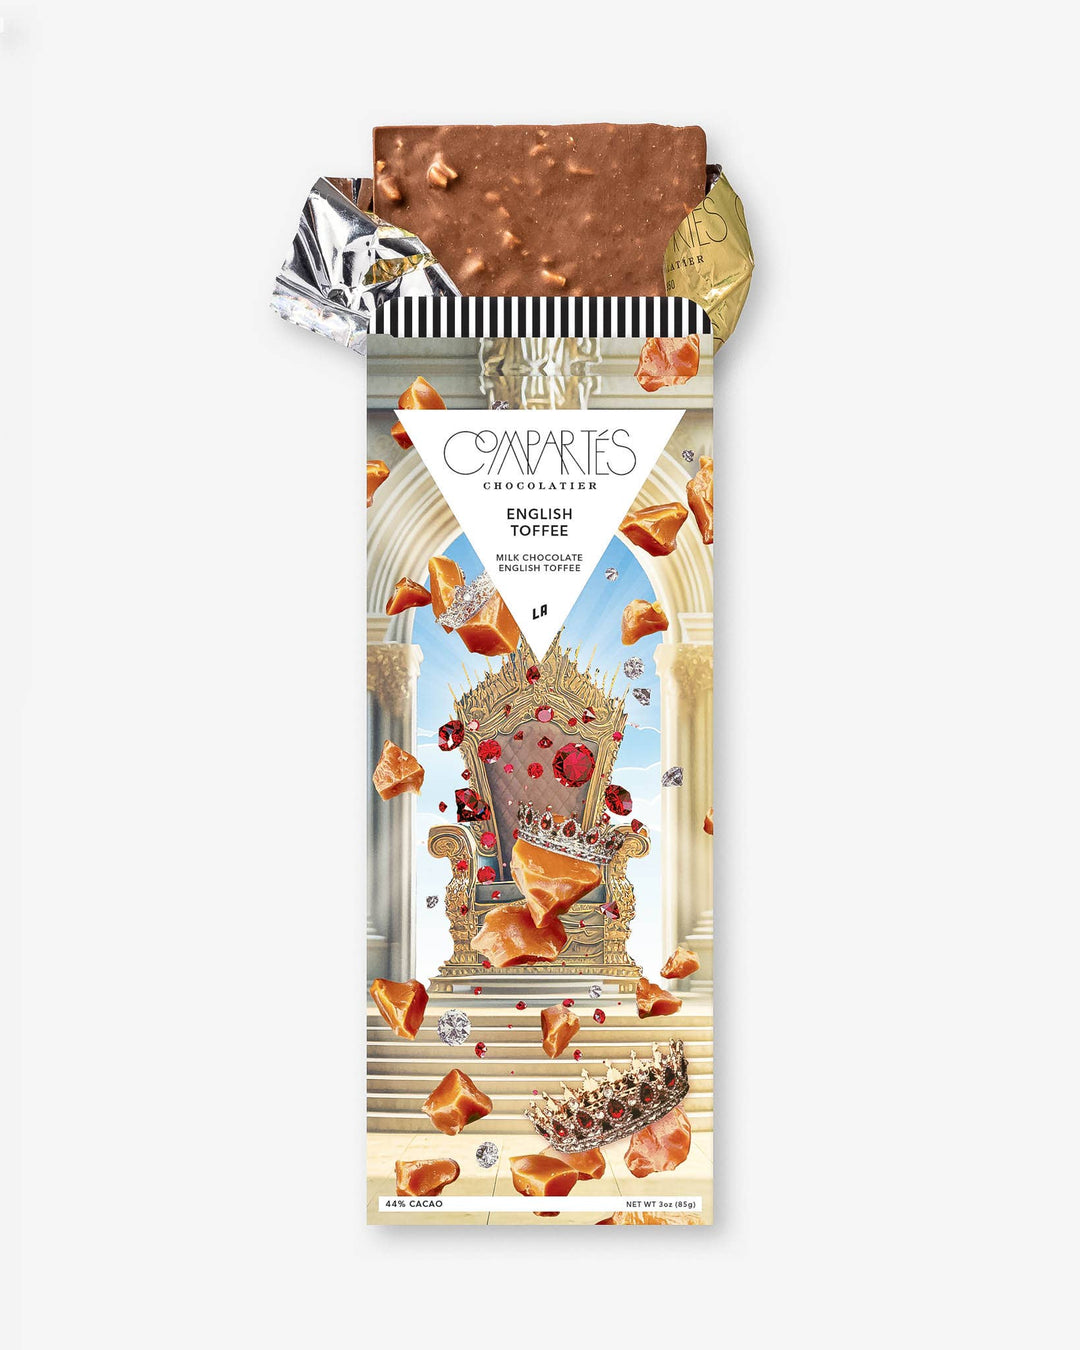 Compartes Chocolate | English Toffee Gourmet Chocolate Bar